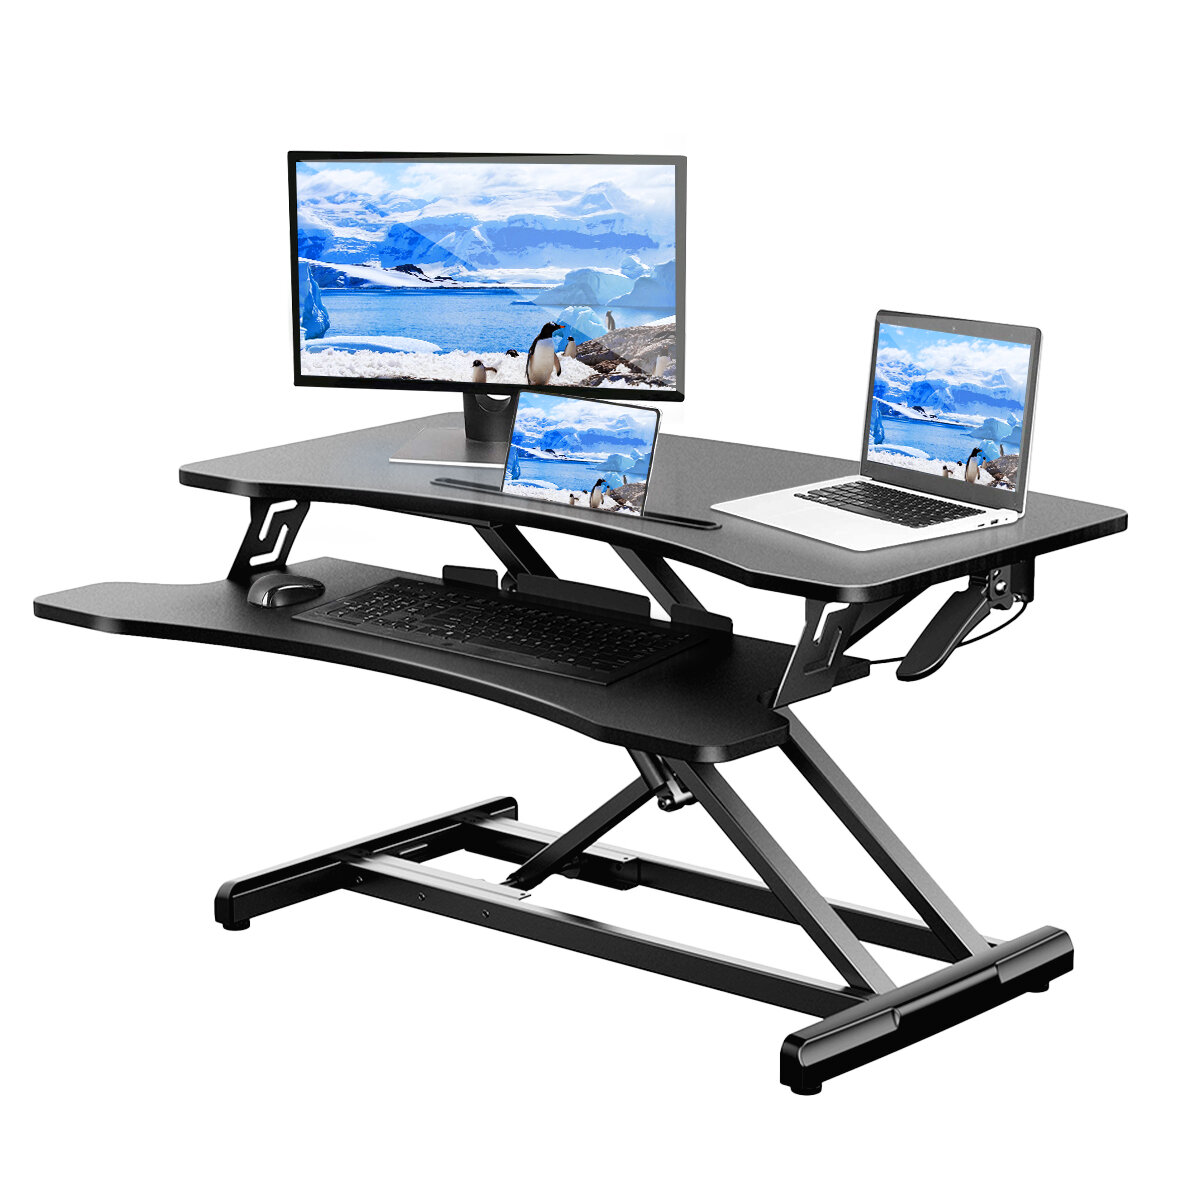 Image of BlitzWolf 32 inch Standing Desk Adjustable Height Converter with Handle Control Lift for Dual Monitors and Laptop Simple